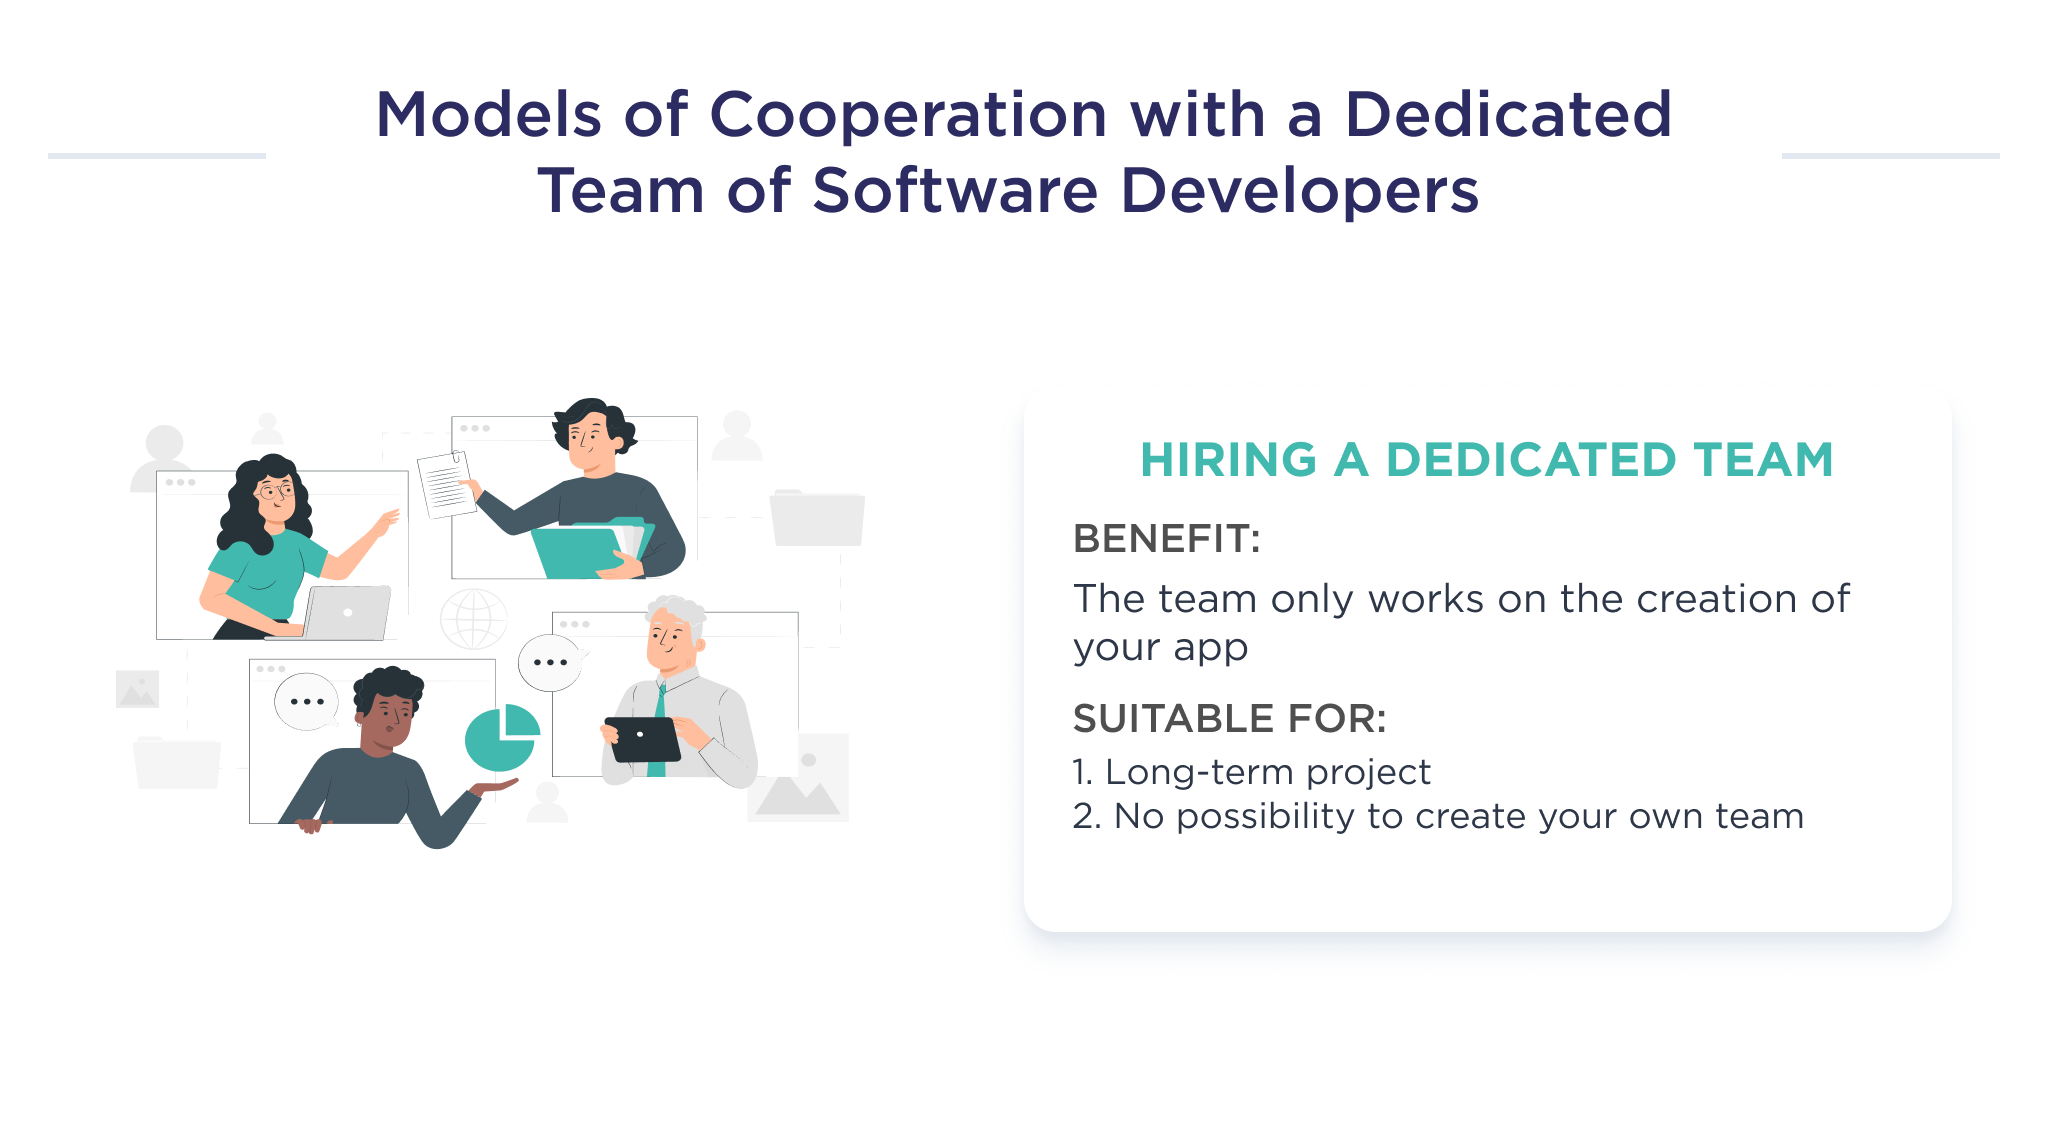 This picture describes one of the models of cooperation with a dedicated team of software developers namely, hiring a dedicated team